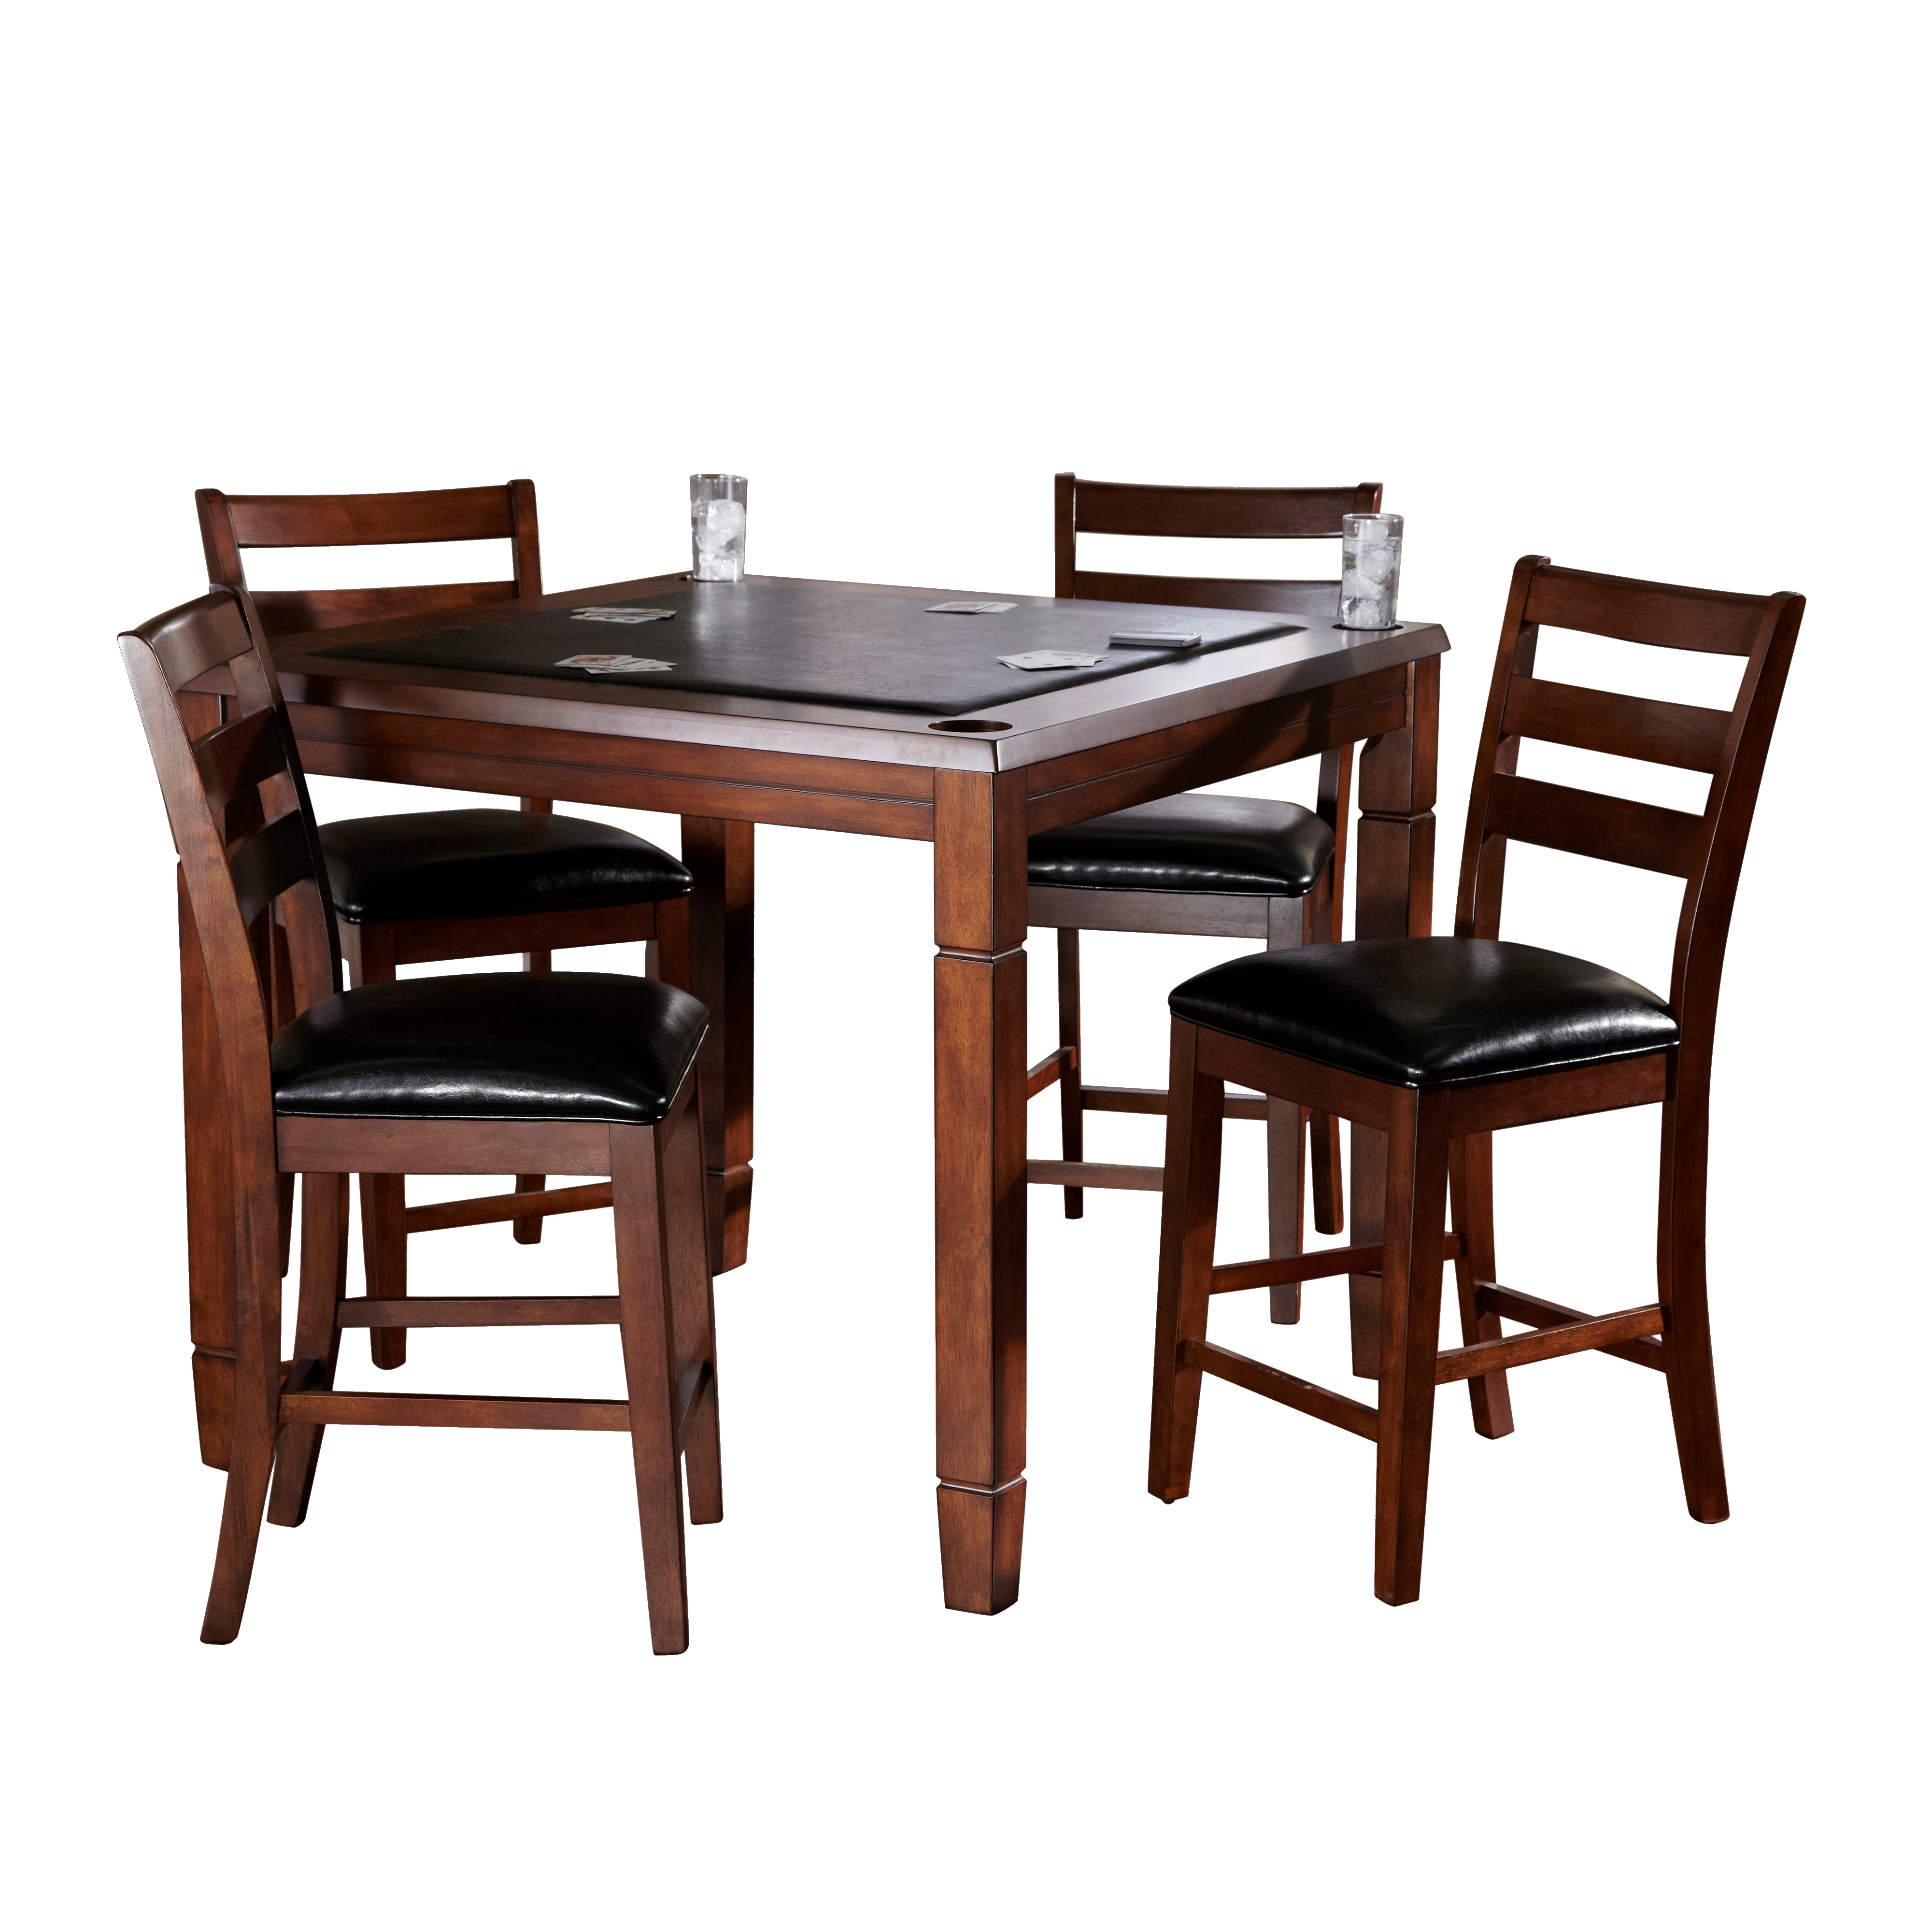 American Heritage Rosa Game Table (Suede)